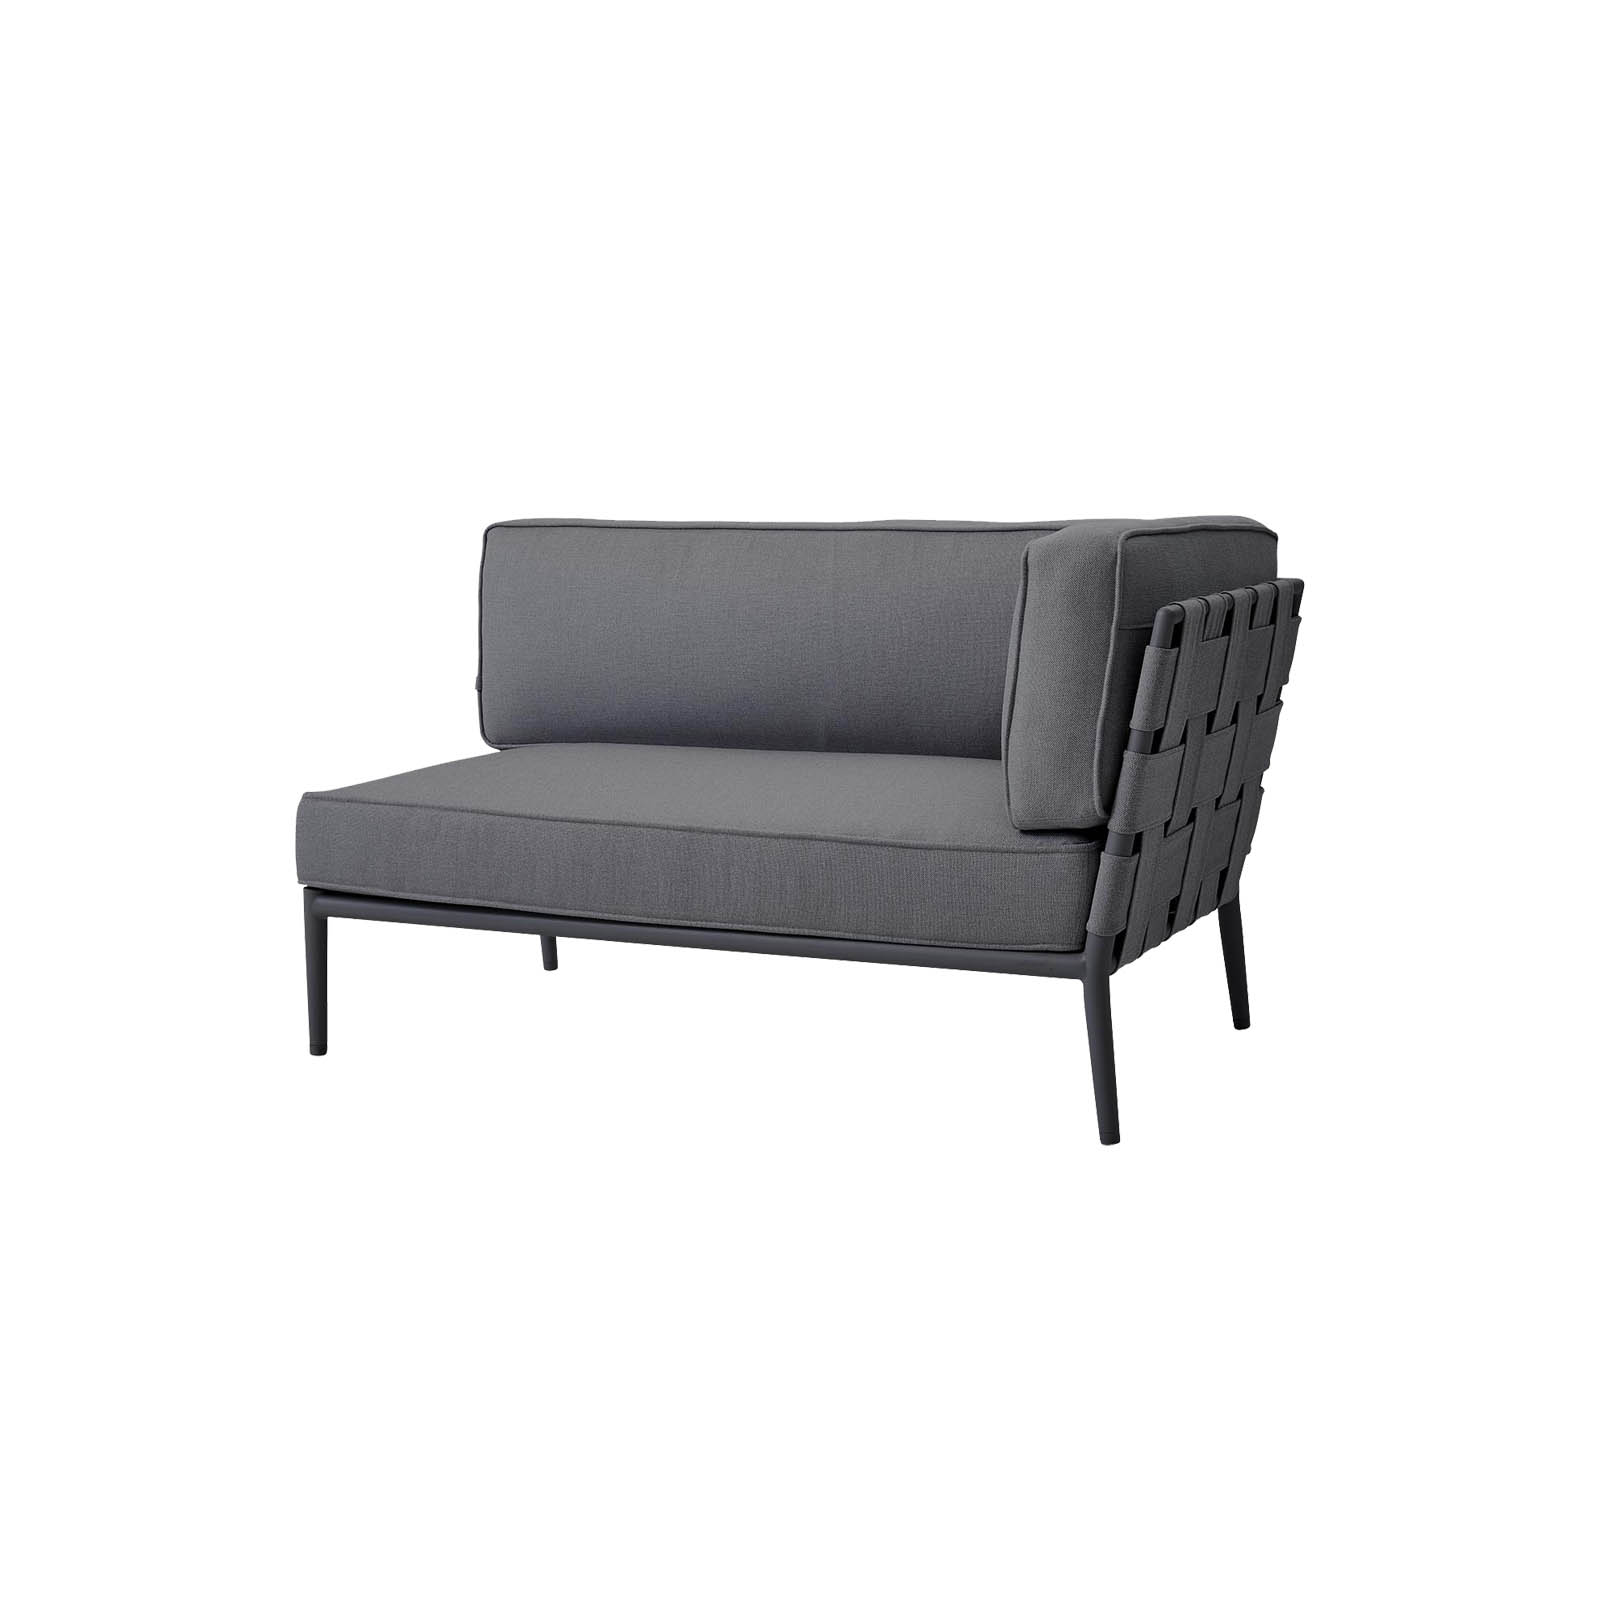 Conic 2-Sitzer Sofa-Modul links aus Cane-line AirTouch mit QuickDry in Grey